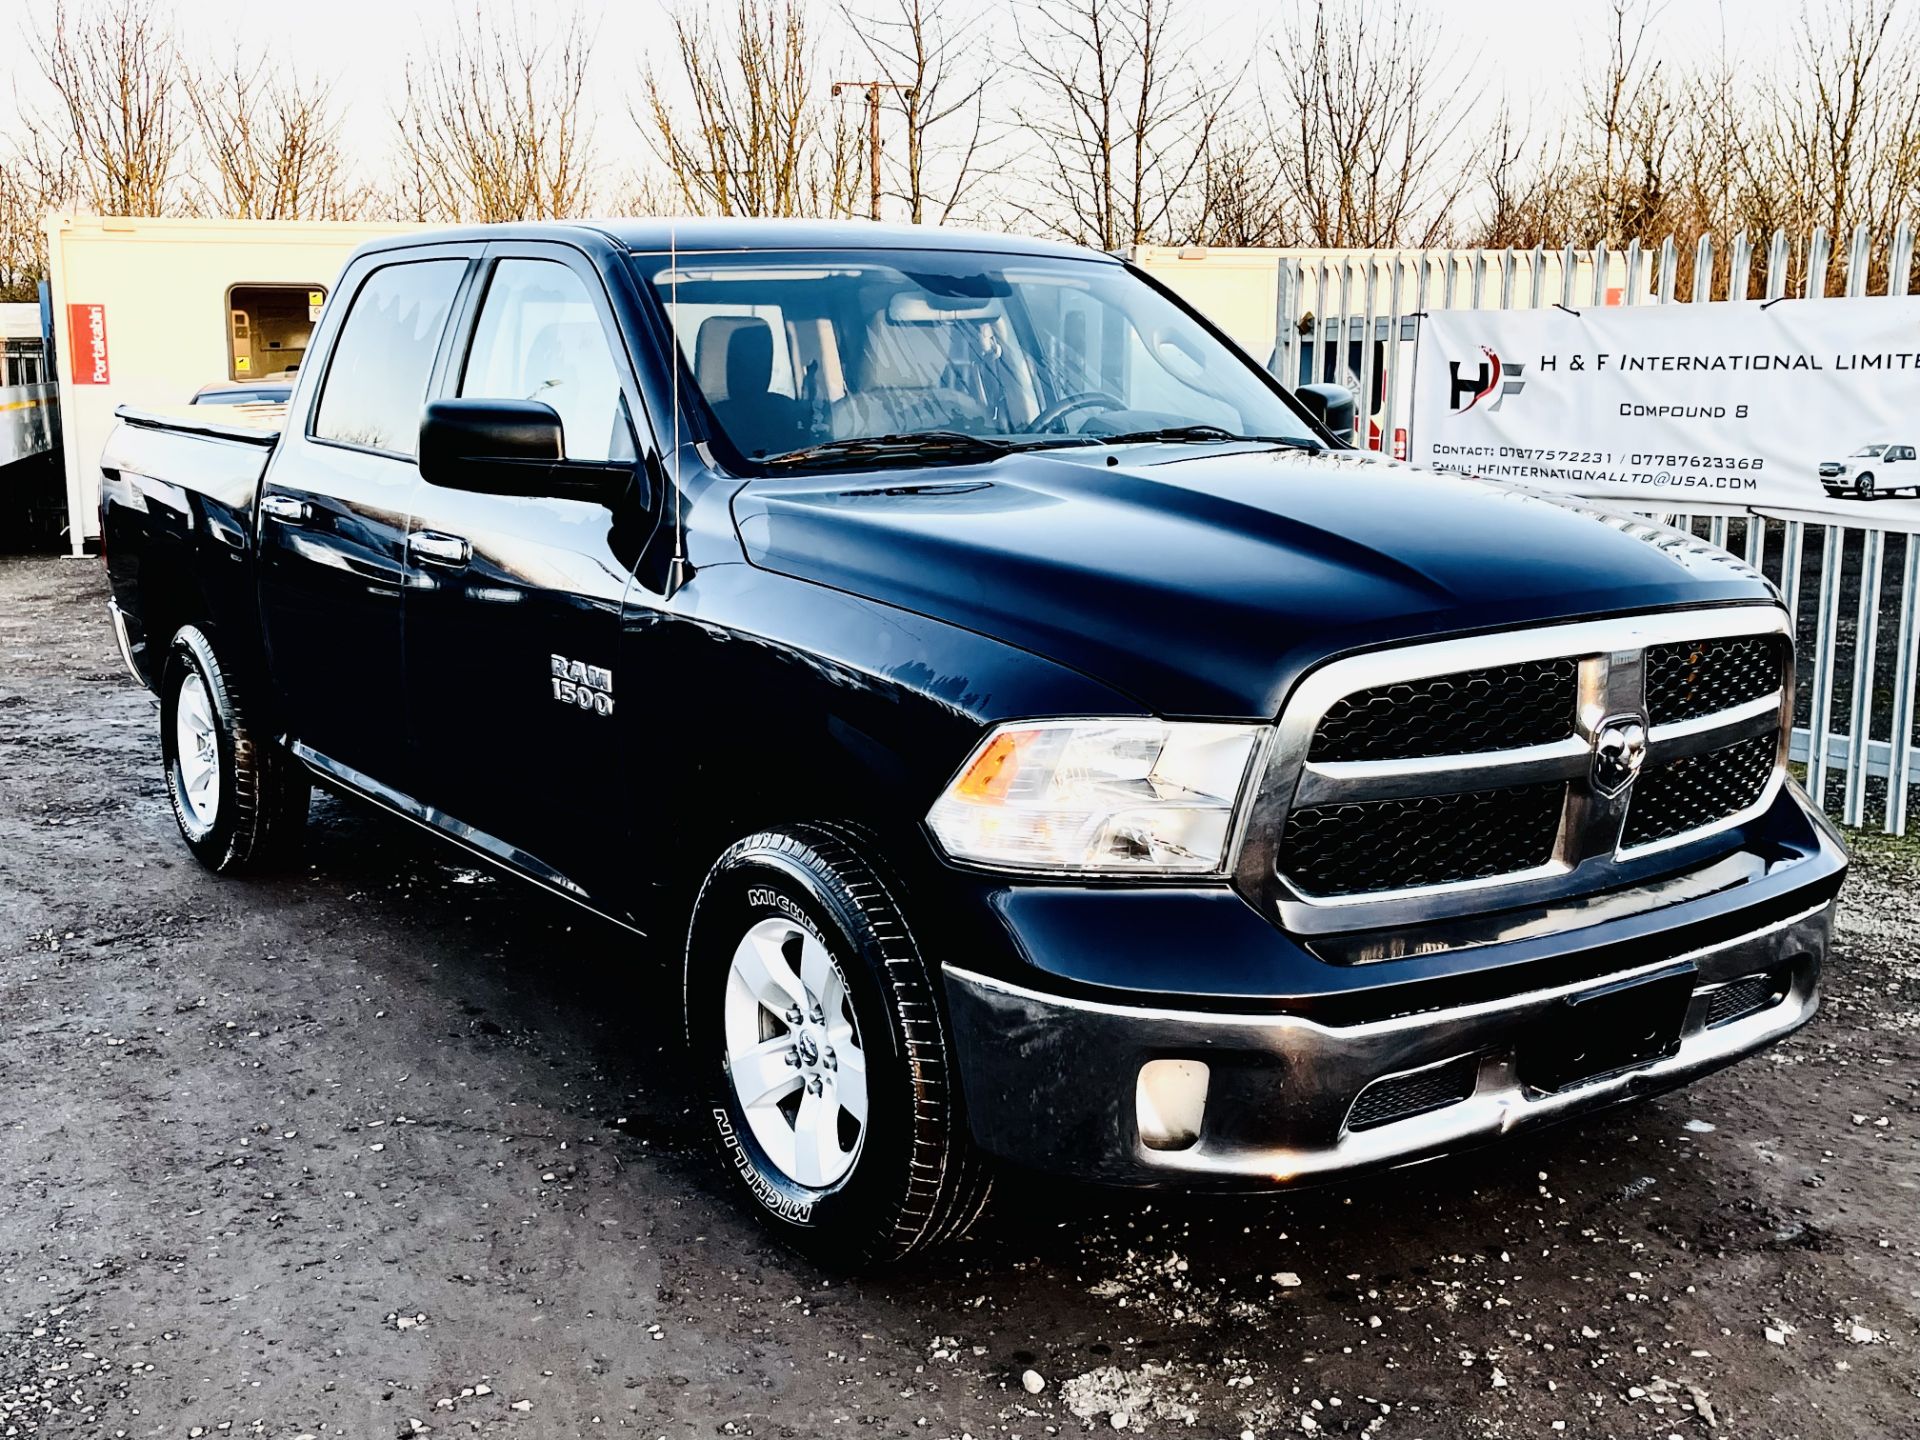 ** ON SALE ** Dodge Ram 3.5L V6 1500 Crew Cab SLT ' 2015 Year ' A/C - 6 Seats - Chrome Package - Image 2 of 31